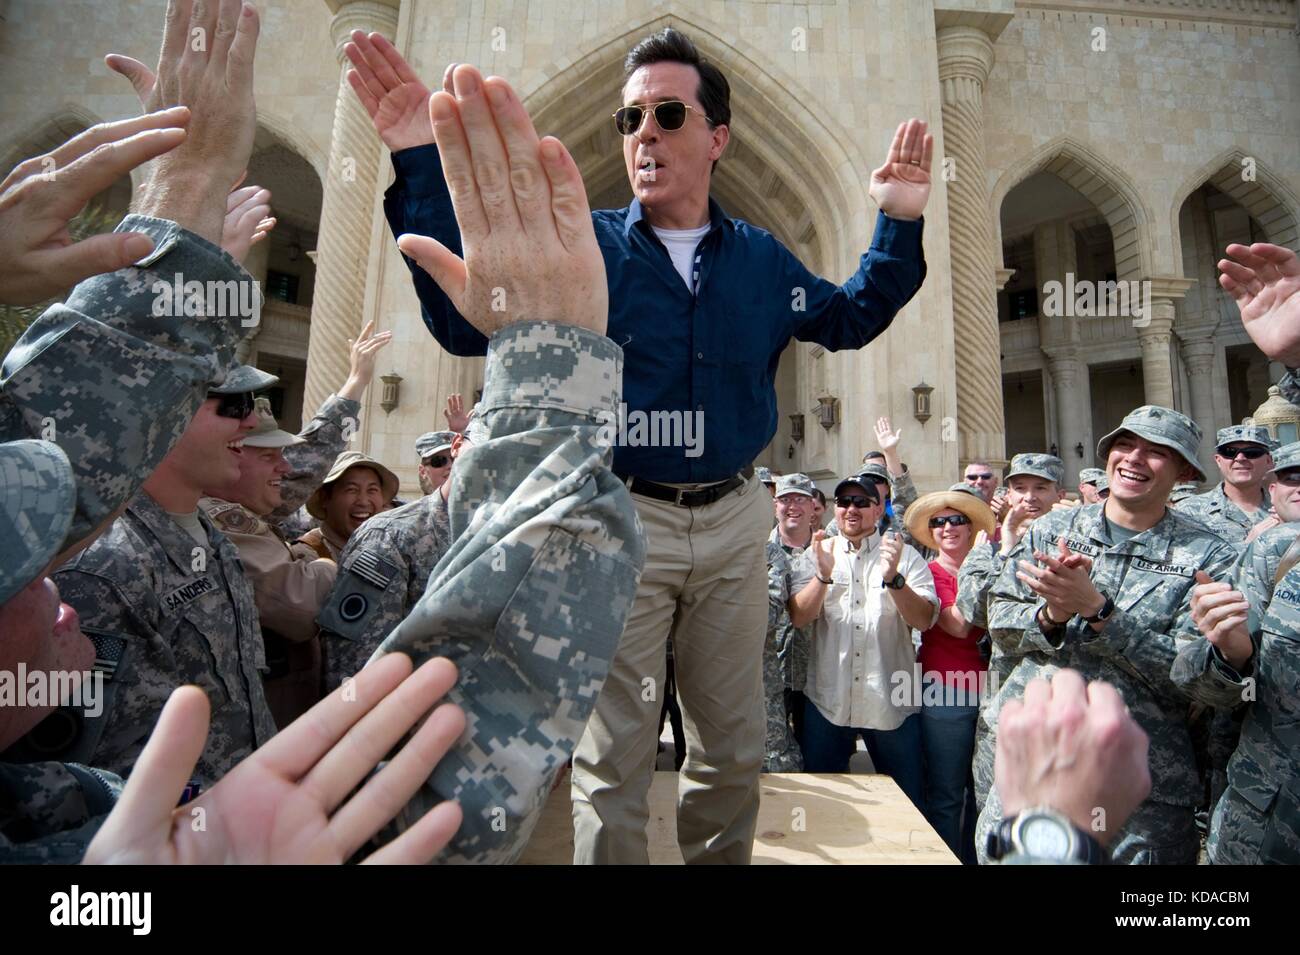 Actor and comedian Stephen Colbert greets U.S. soldiers during his Operation Iraqi Stephen: Going Command tour at the Camp Victory Al Faw Palace June 5, 2009 in Baghdad, Iraq. Stock Photo